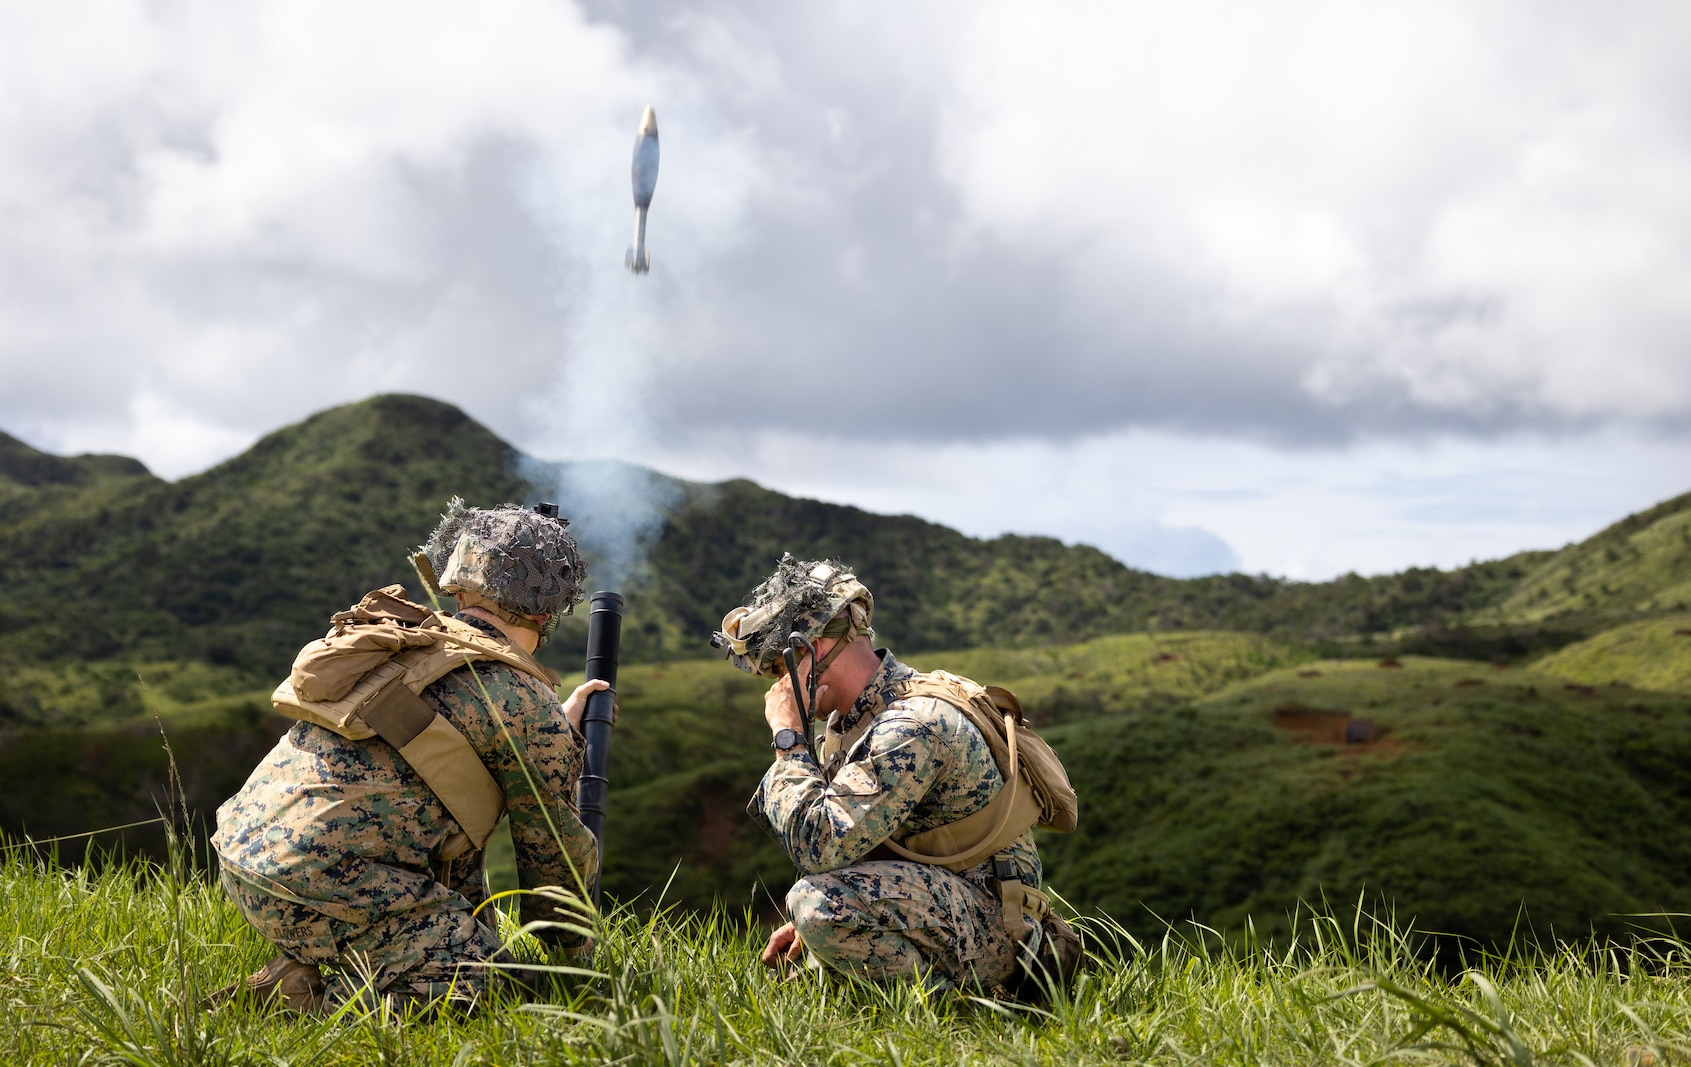 U.S. Marine Corps Lance Cpl. Joseph Flowers (left), an intelligence specialist, and Sgt. Andrew Licea (right), a mortar section leader, both with 3d Battalion, 3d Marines, fire an M224 60 mm mortar system while conducting squad attacks during a live-fire range at Camp Hansen, Okinawa, Japan, July 28, 2022. This training improved the Marines’ proficiency at the tactical level and developed small-unit leadership. 3/3 is forward deployed in the Indo-Pacific under 4th Marines, 3d Marine Division as part of the Unit Deployment Program. (U.S. Marine Corps photo by Sgt. Micha Pierce)